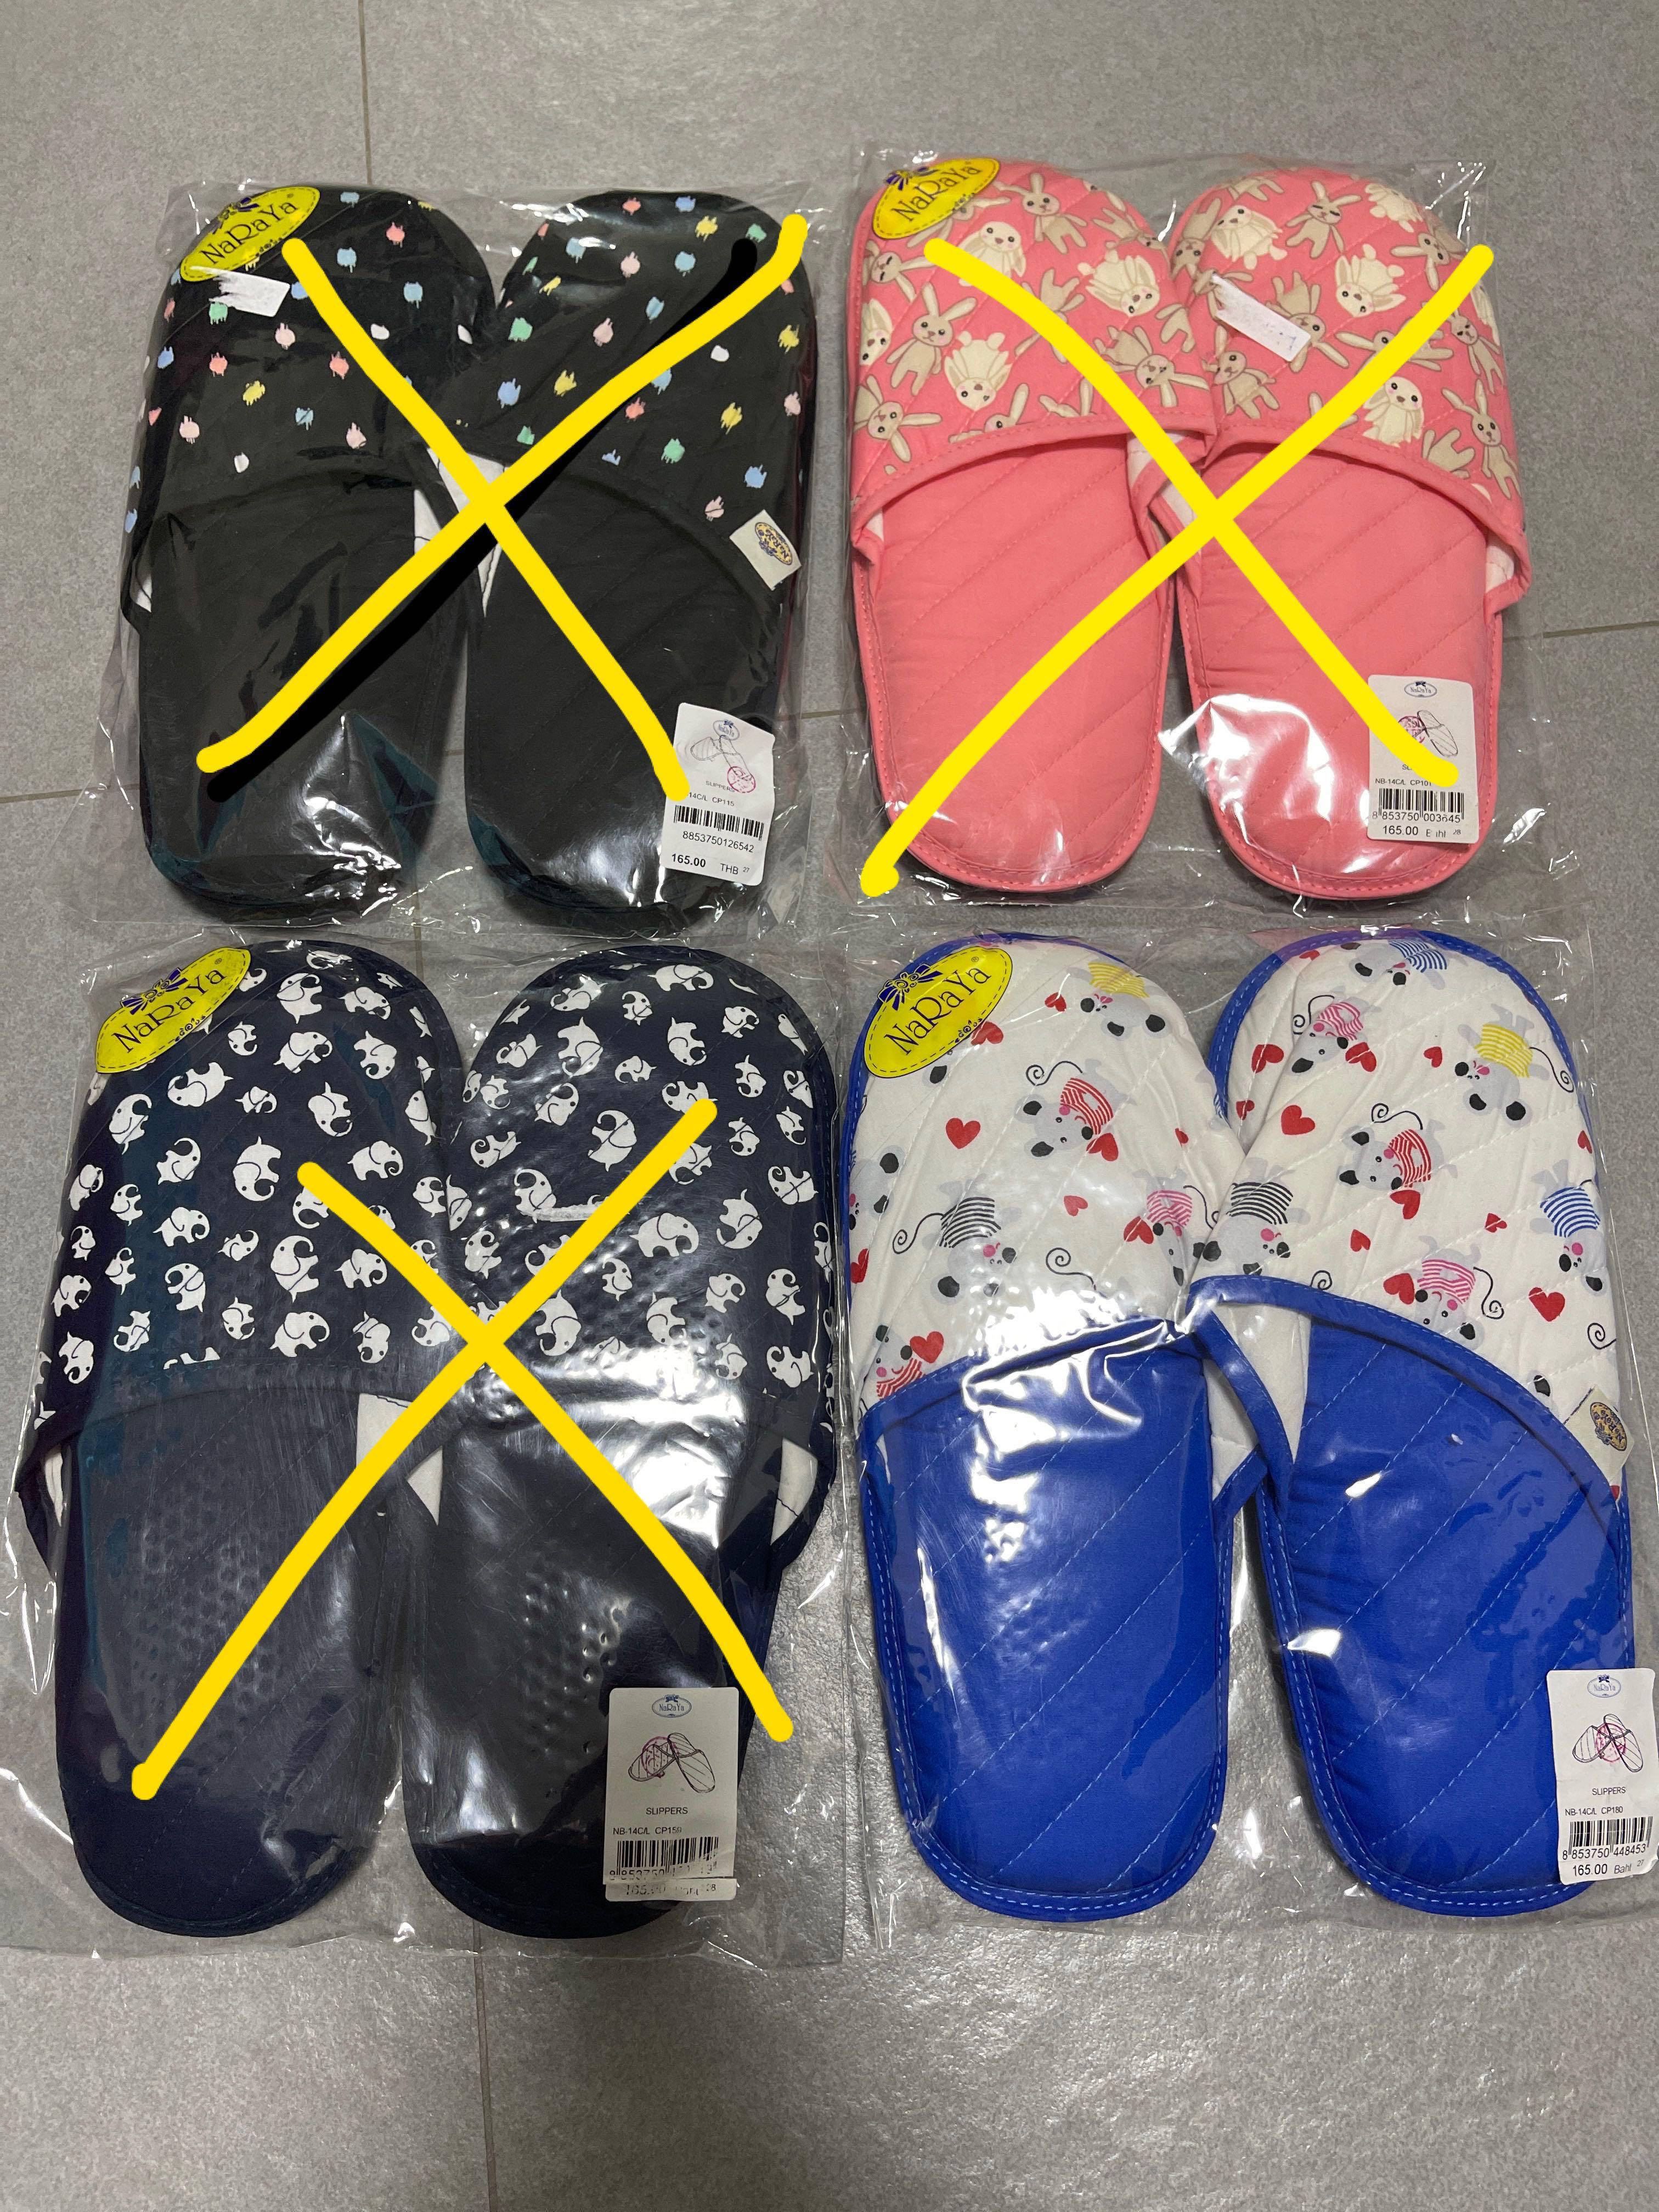 Authentic Naraya bedroom slippers -L sizes, Women's Fashion, Footwear,  Flipflops and Slides on Carousell